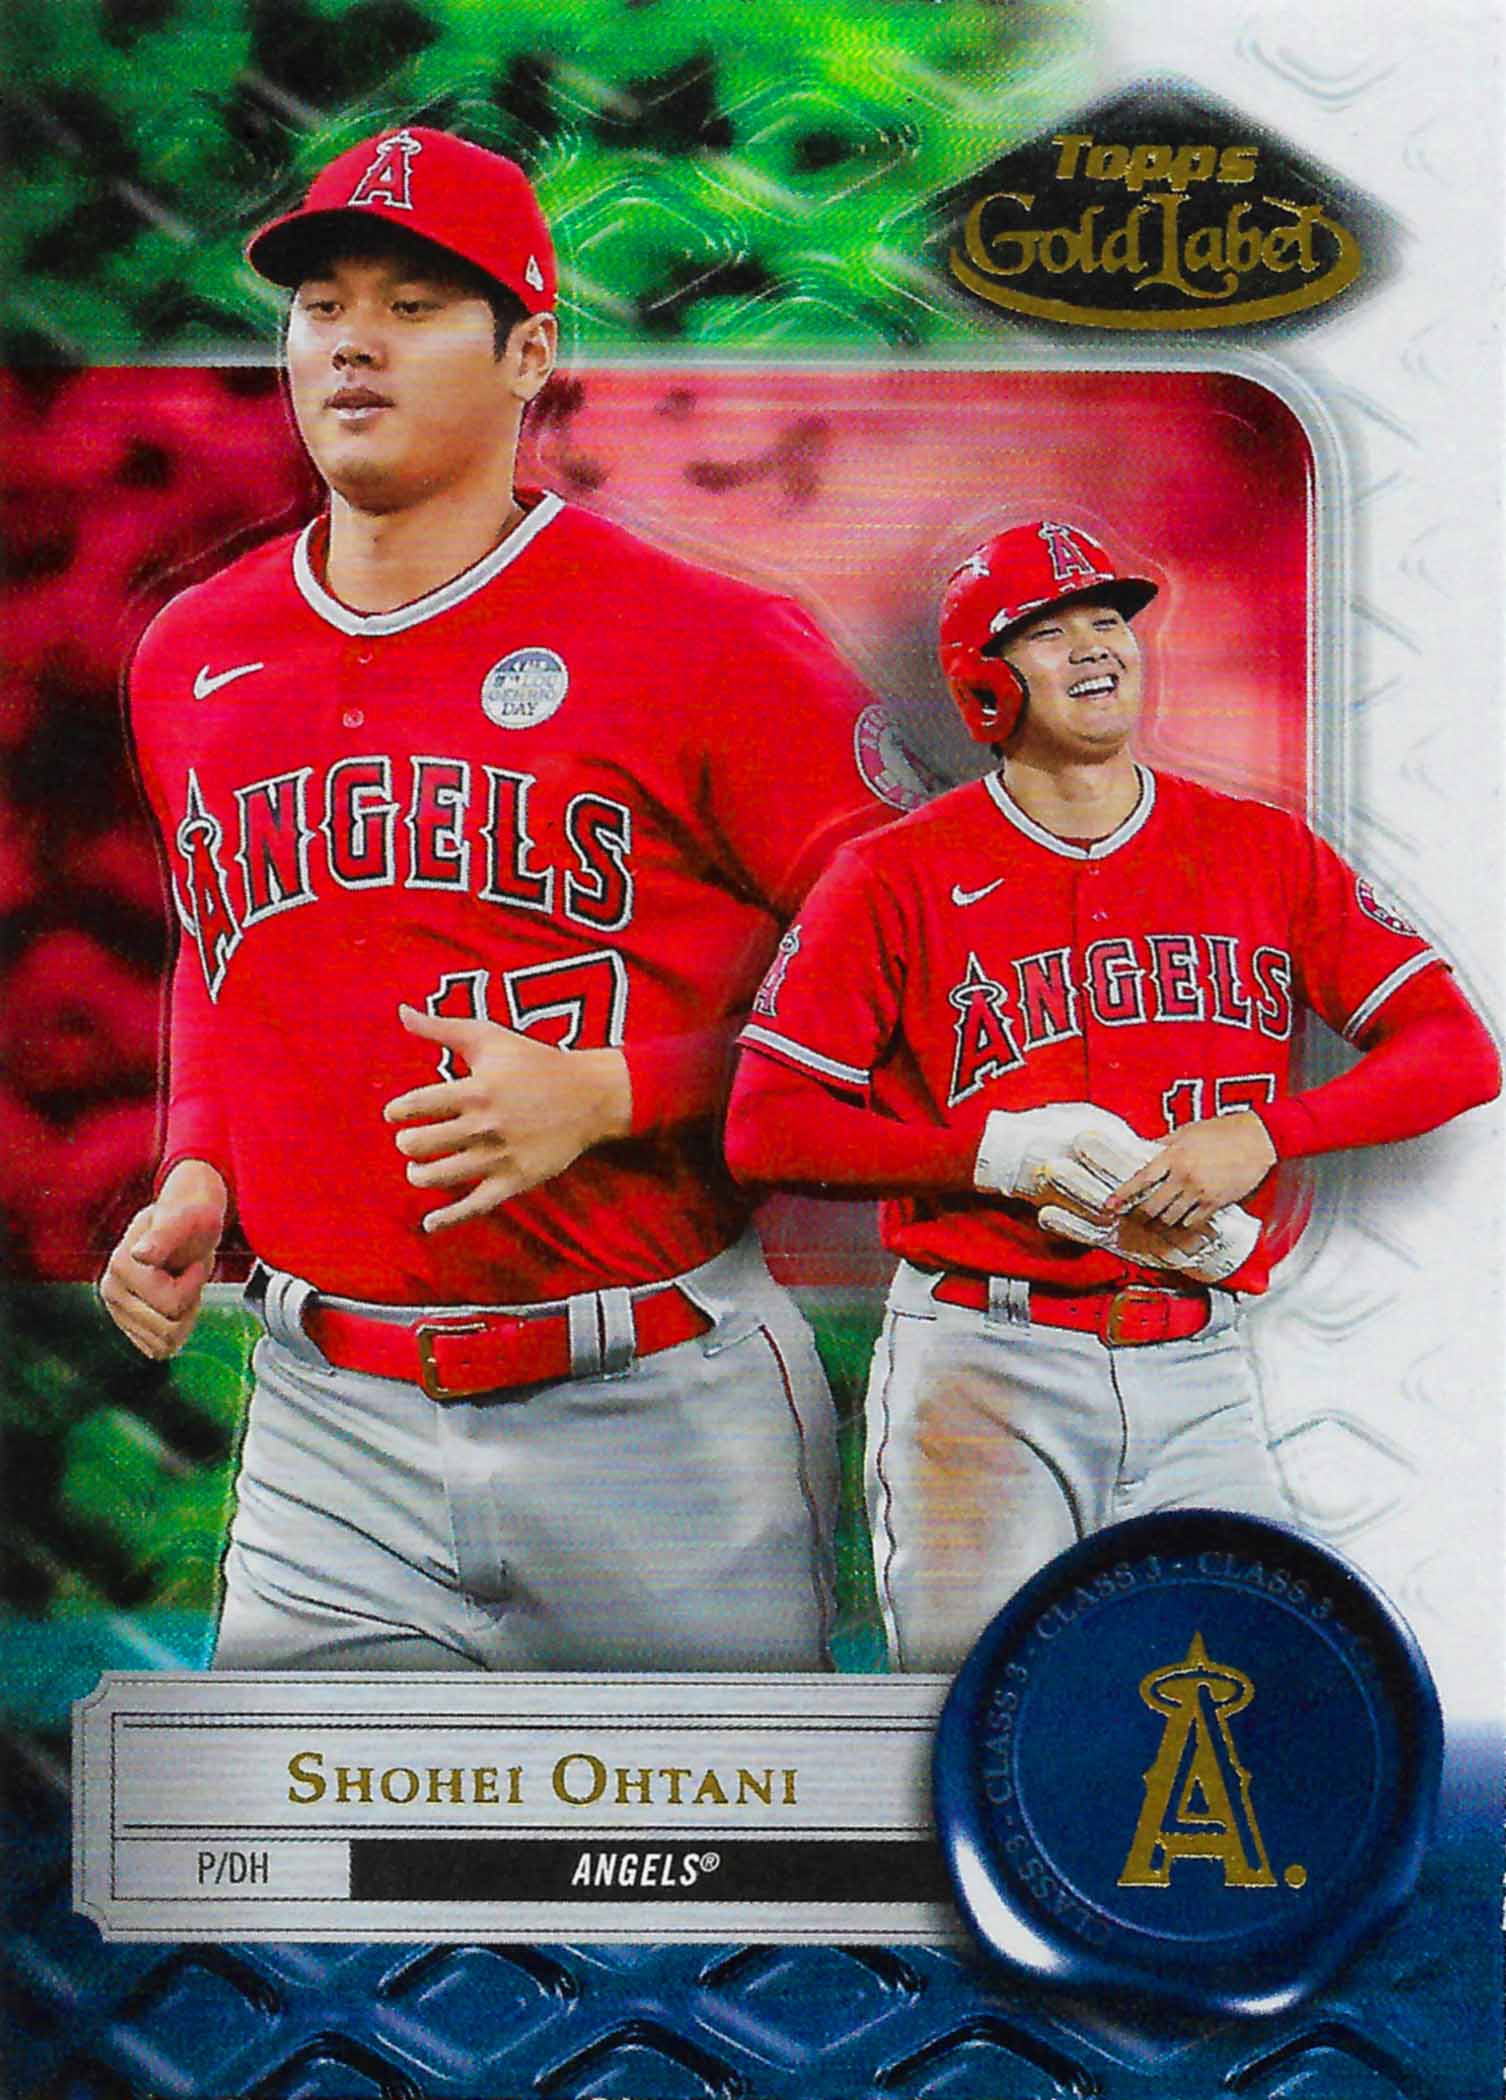 2022 Topps Gold Label Class 3